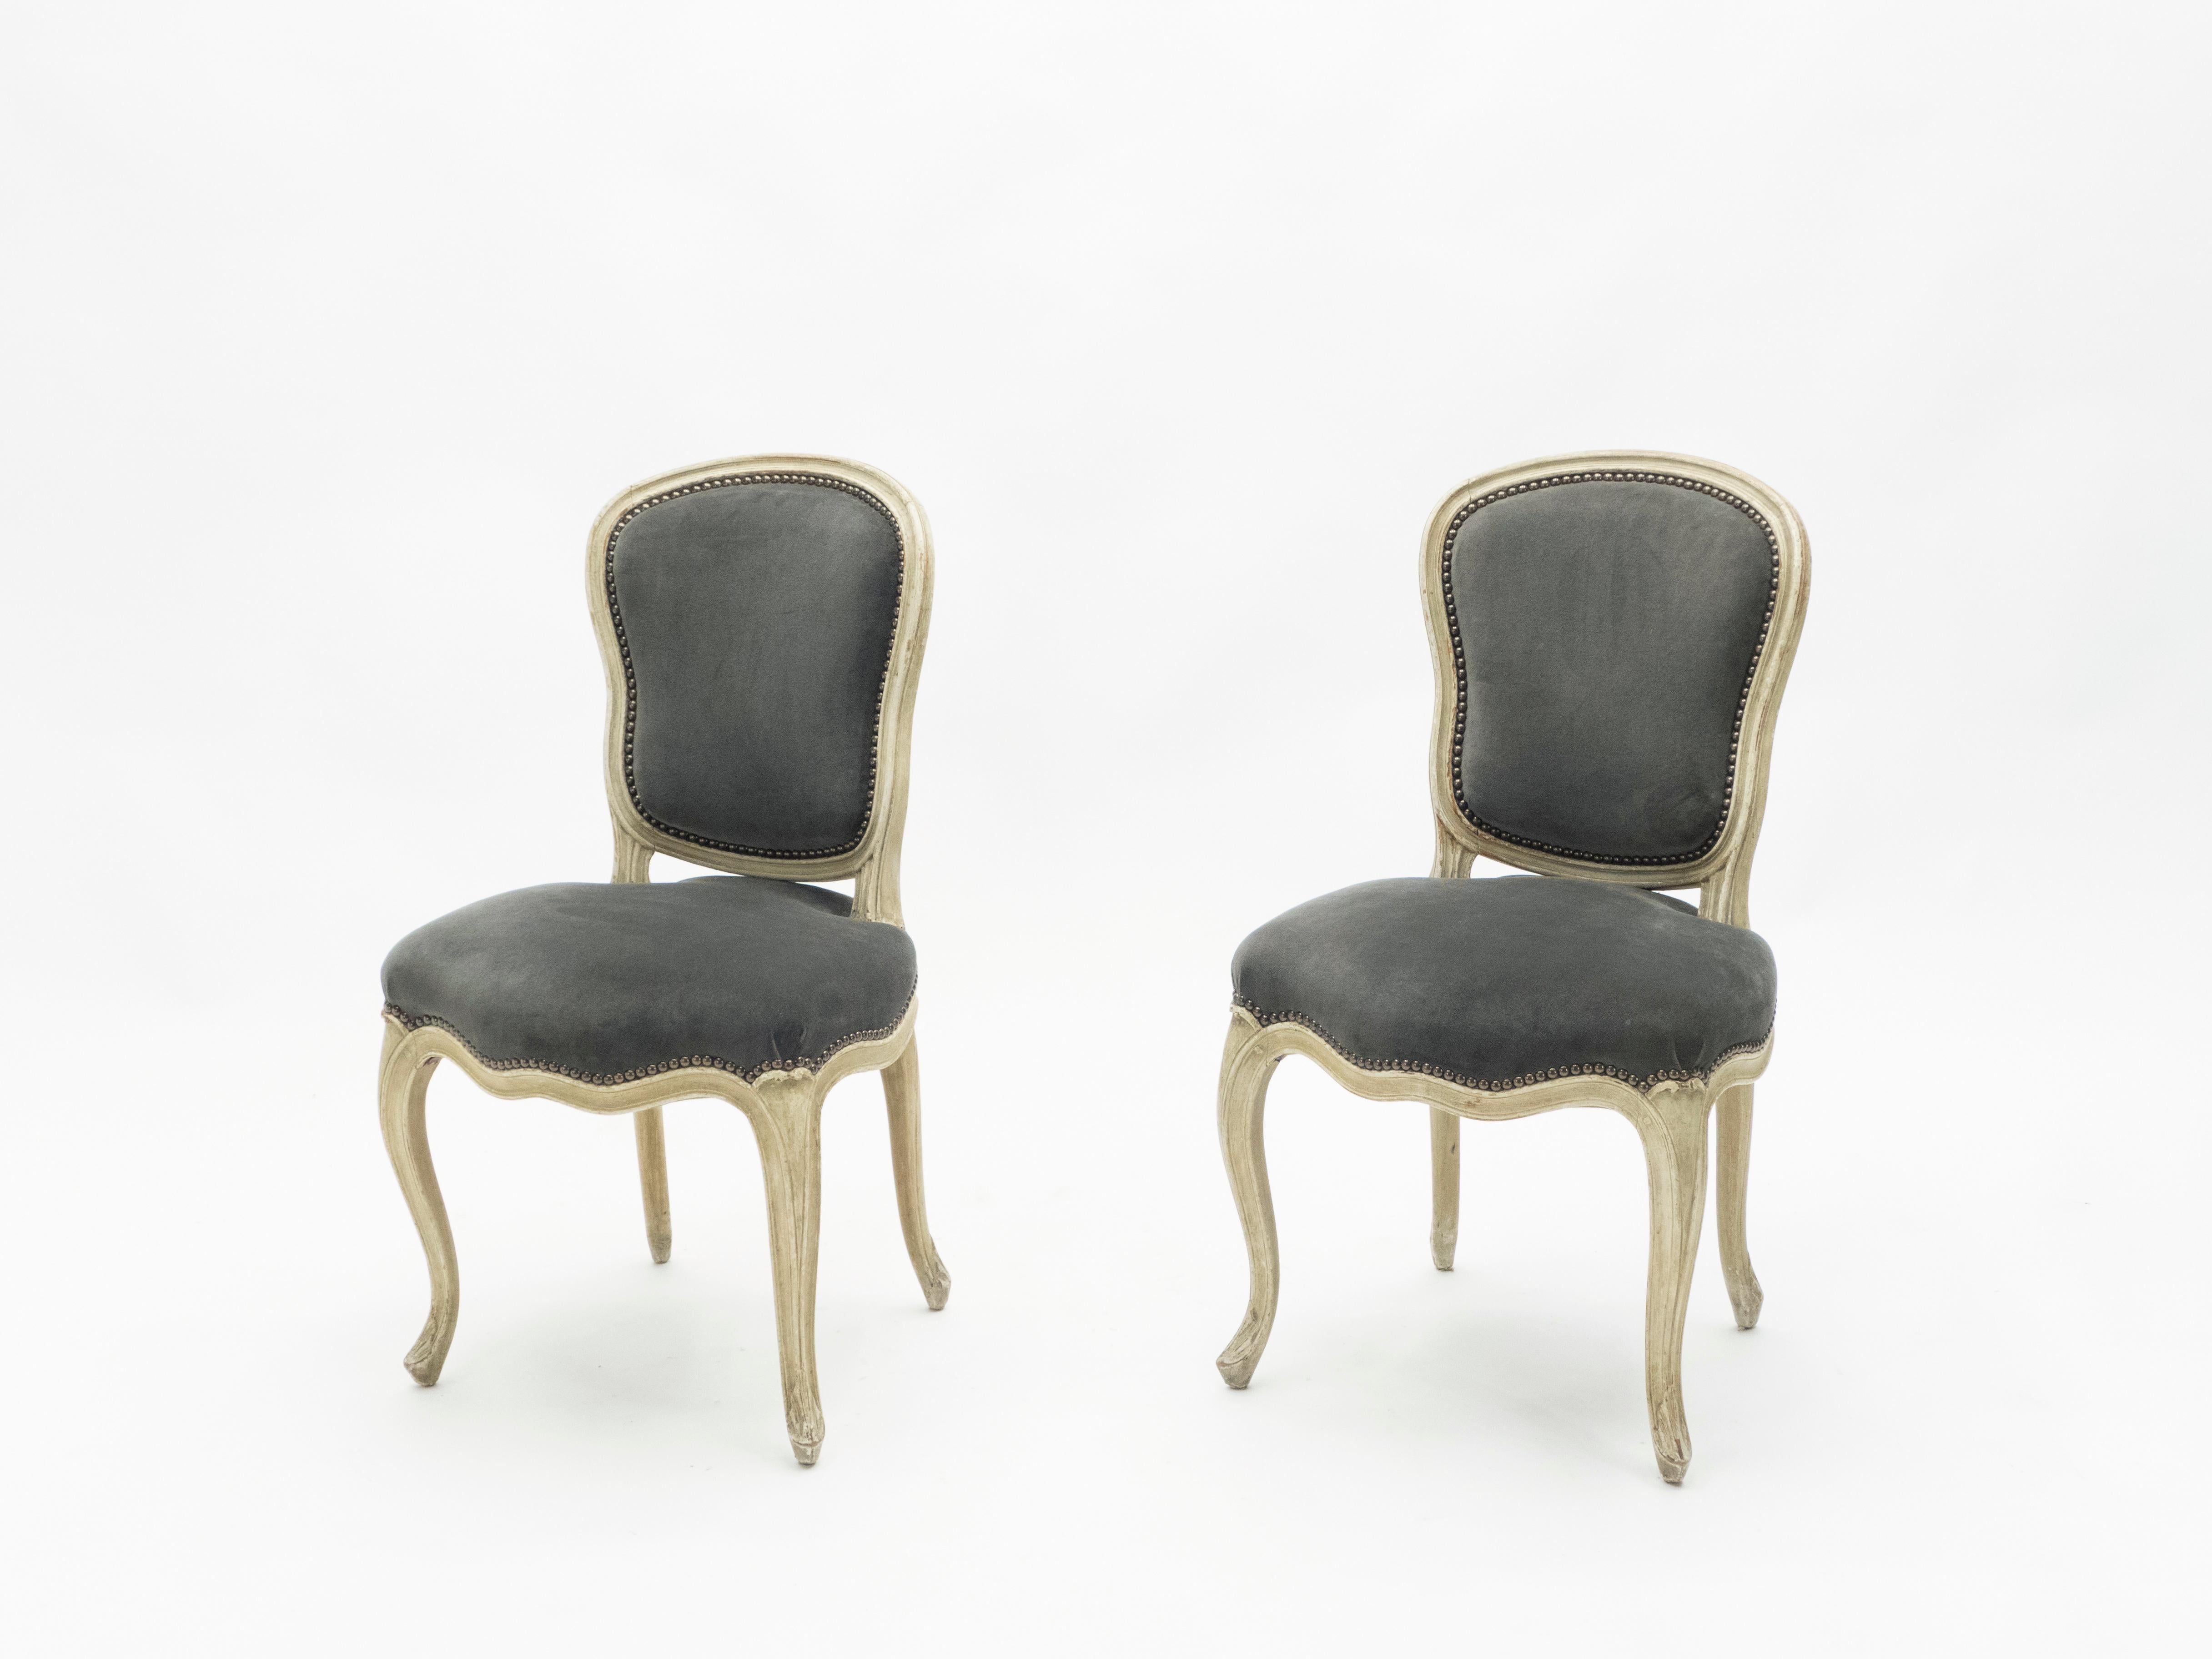 The construction of this pair of chairs was deeply cared about, and it shows in the finished product, even some eight decades later. The chairs were made and stamped by French firm Maison Jansen in the early 1940s in their pure Neoclassical Louis XV